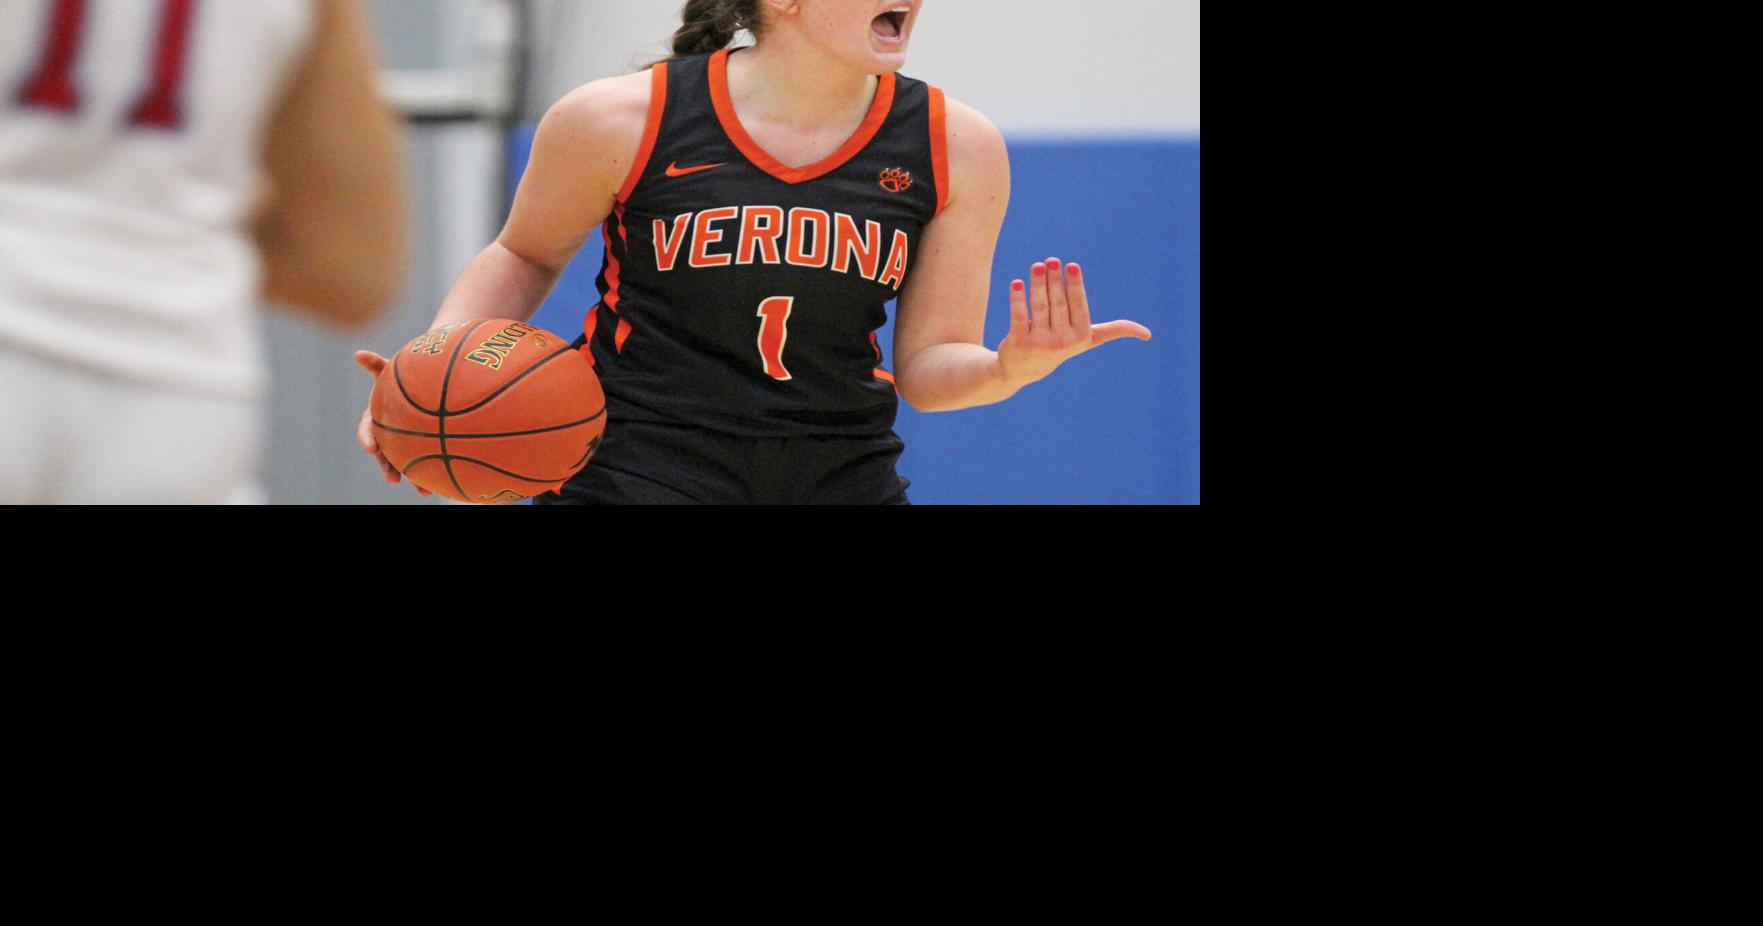 Girls basketball: Verona’s Taylor Stremlow named Big Eight Player of the Year